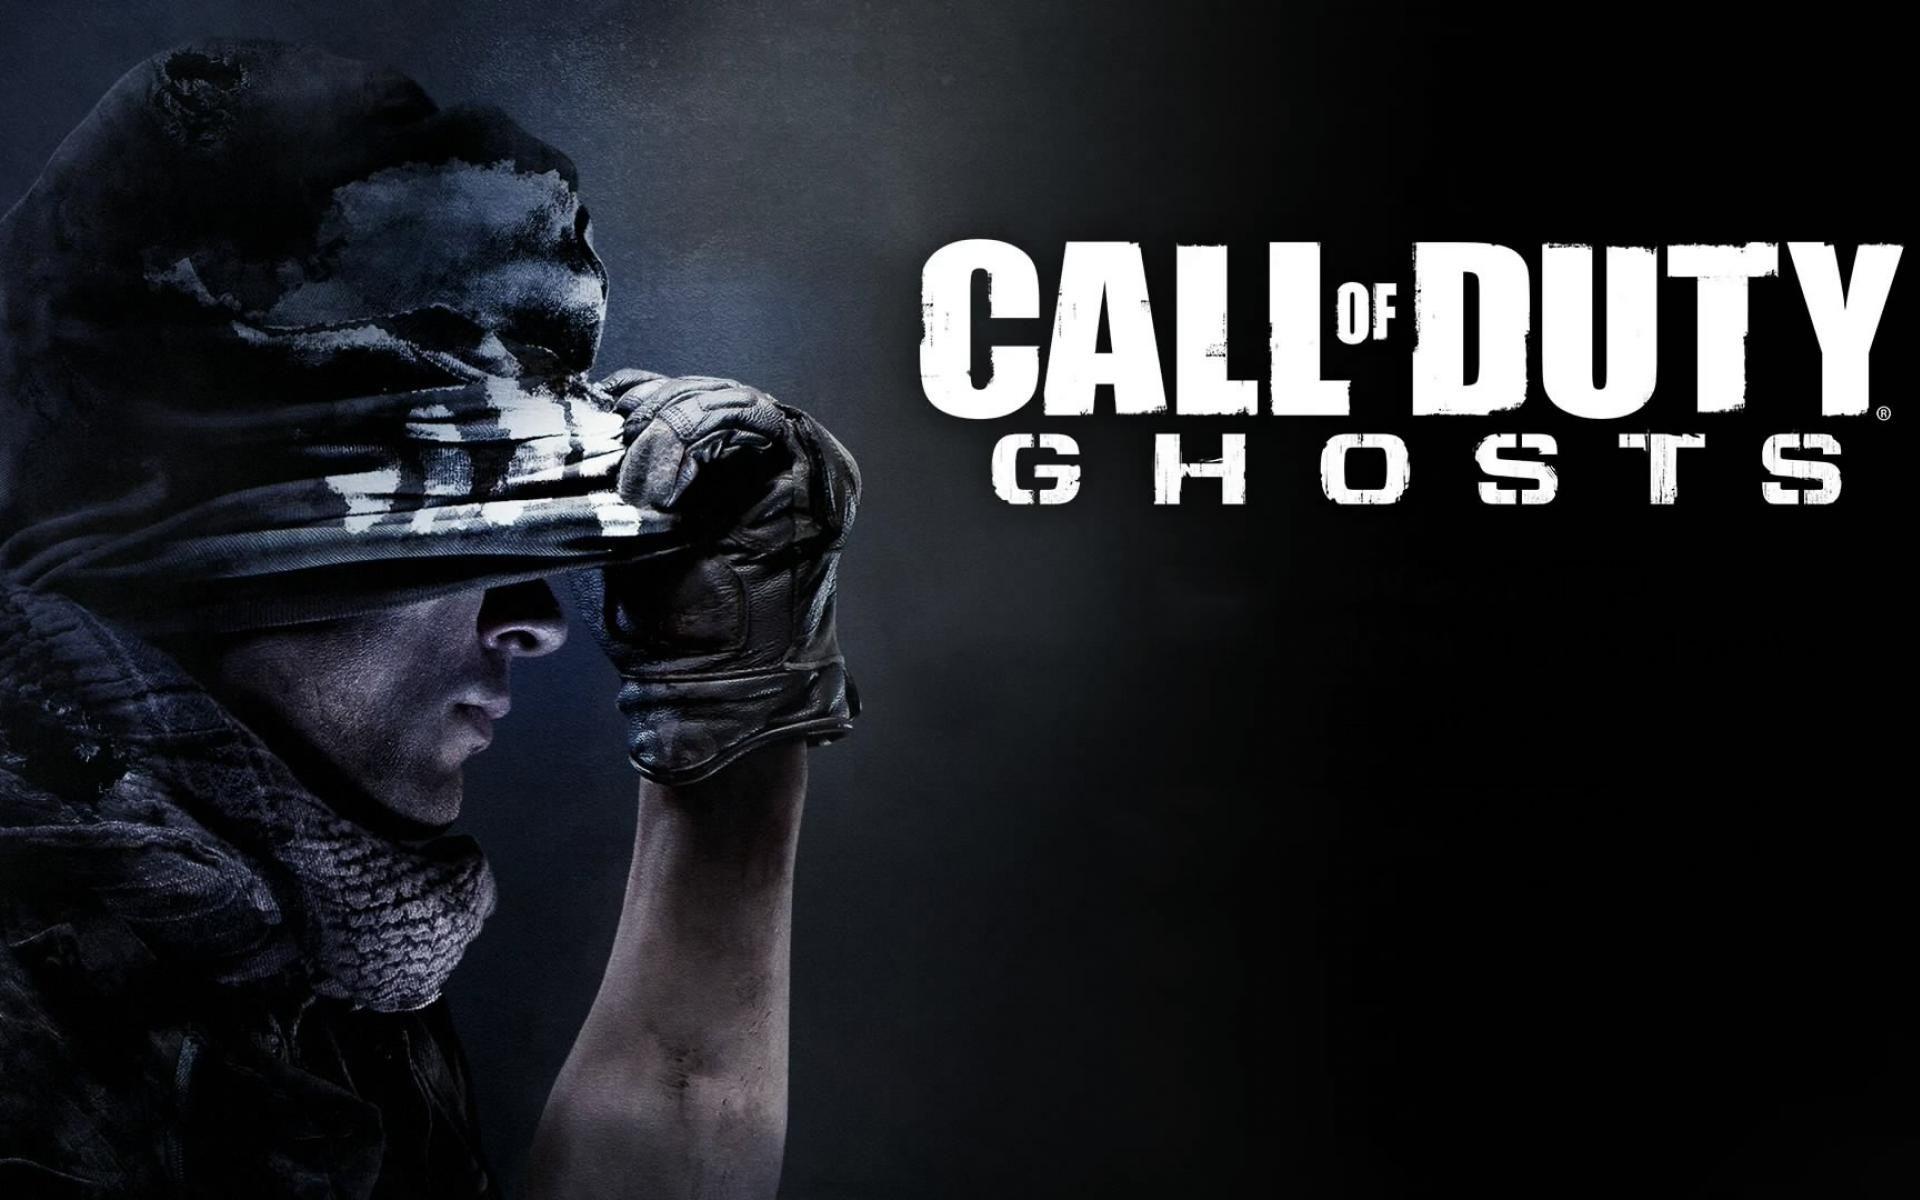 Call of duty ghosts background wallpaper